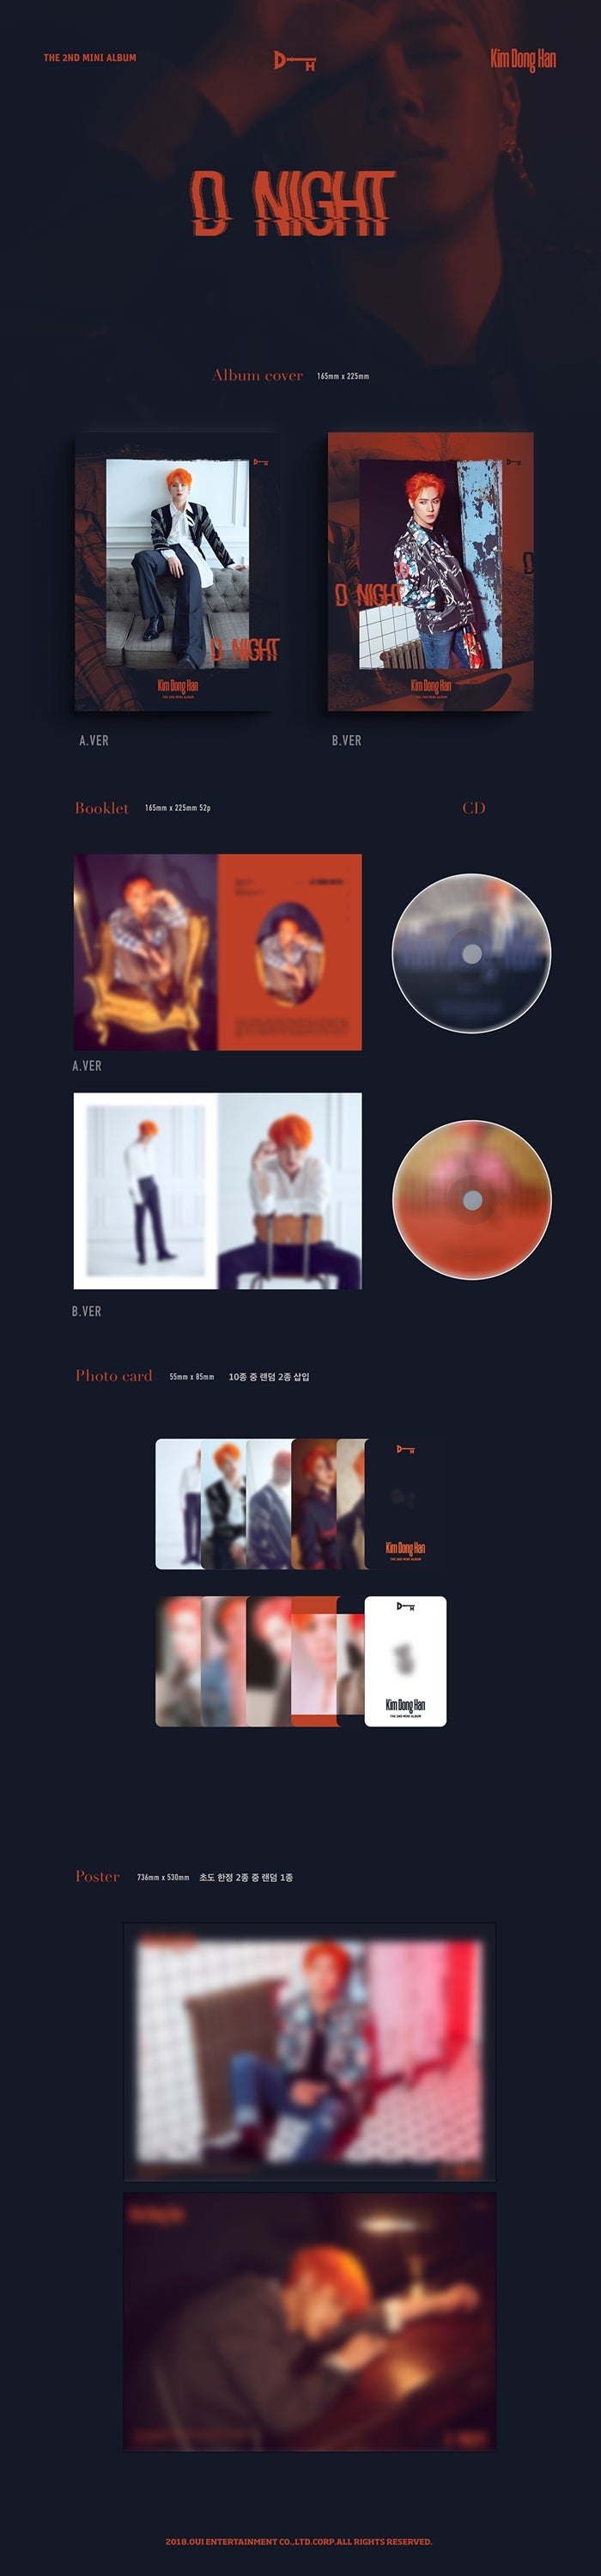 1 CD
1 Booklet (52 pages)
2 Photo Cards